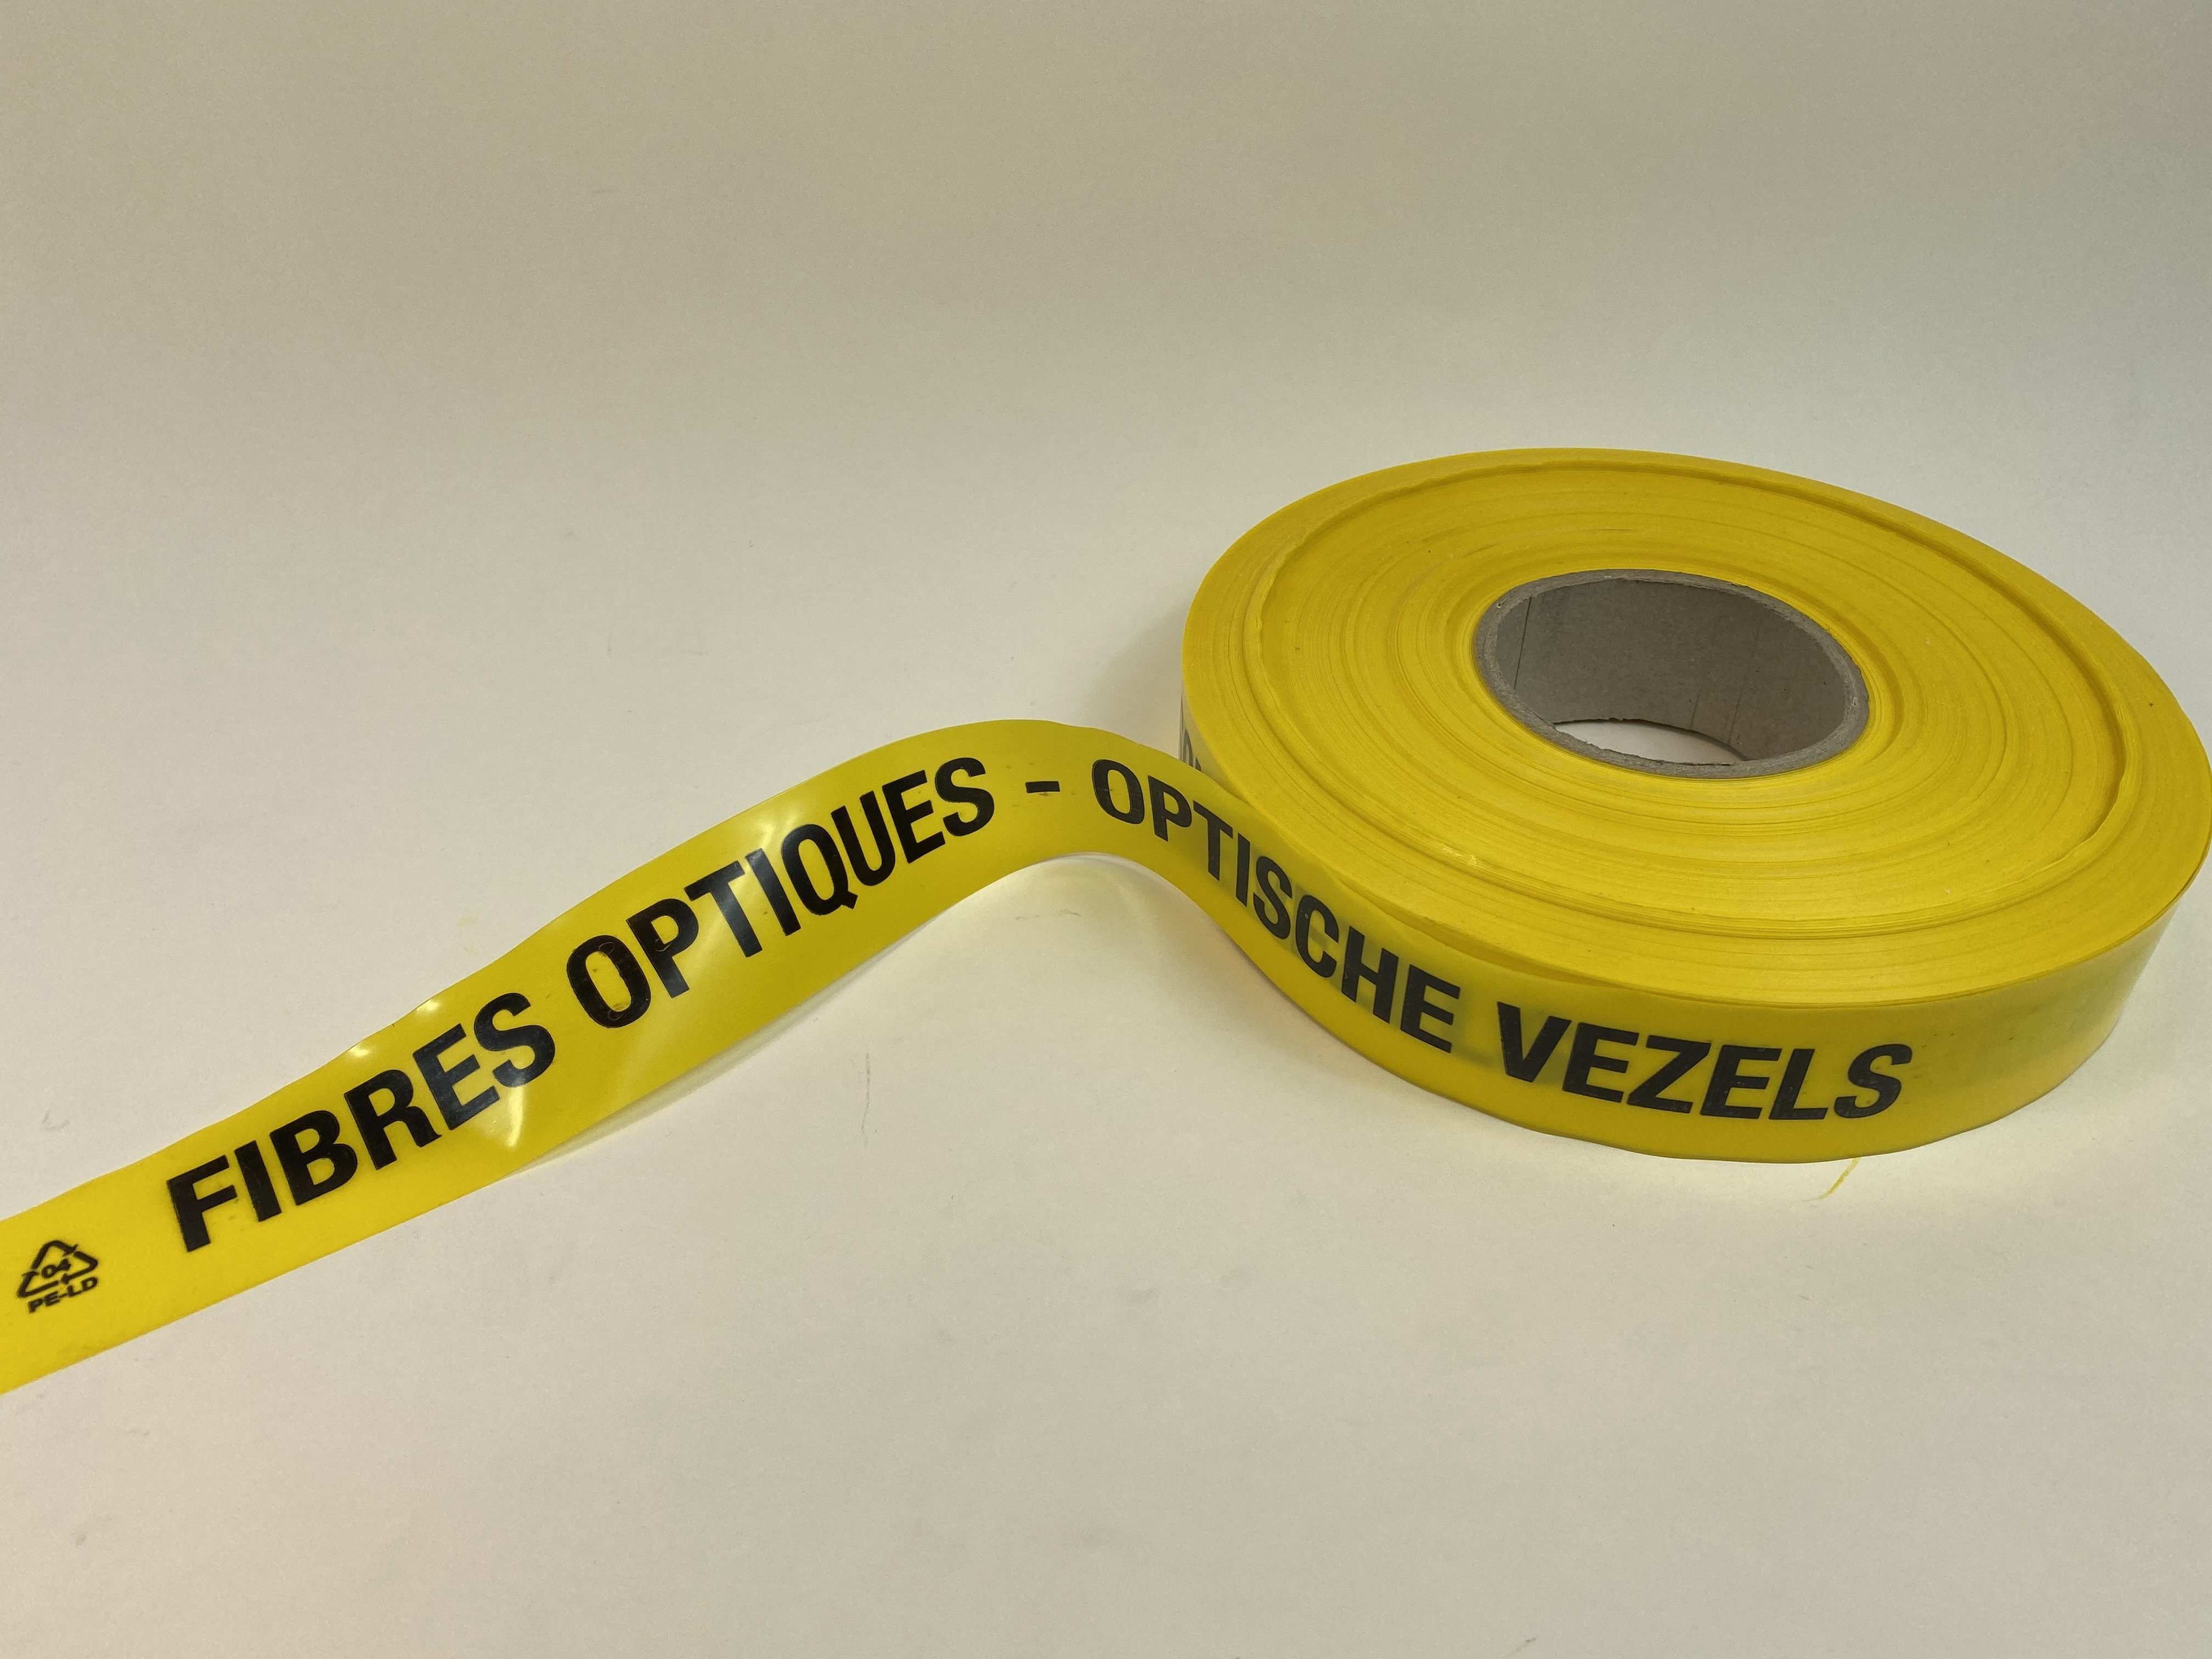 YELLOW WARNING TAPE 40 mm'FIBRES OPTIQUES' -'OPTISCHE VEZELS'250 m roll with markingLDPE,